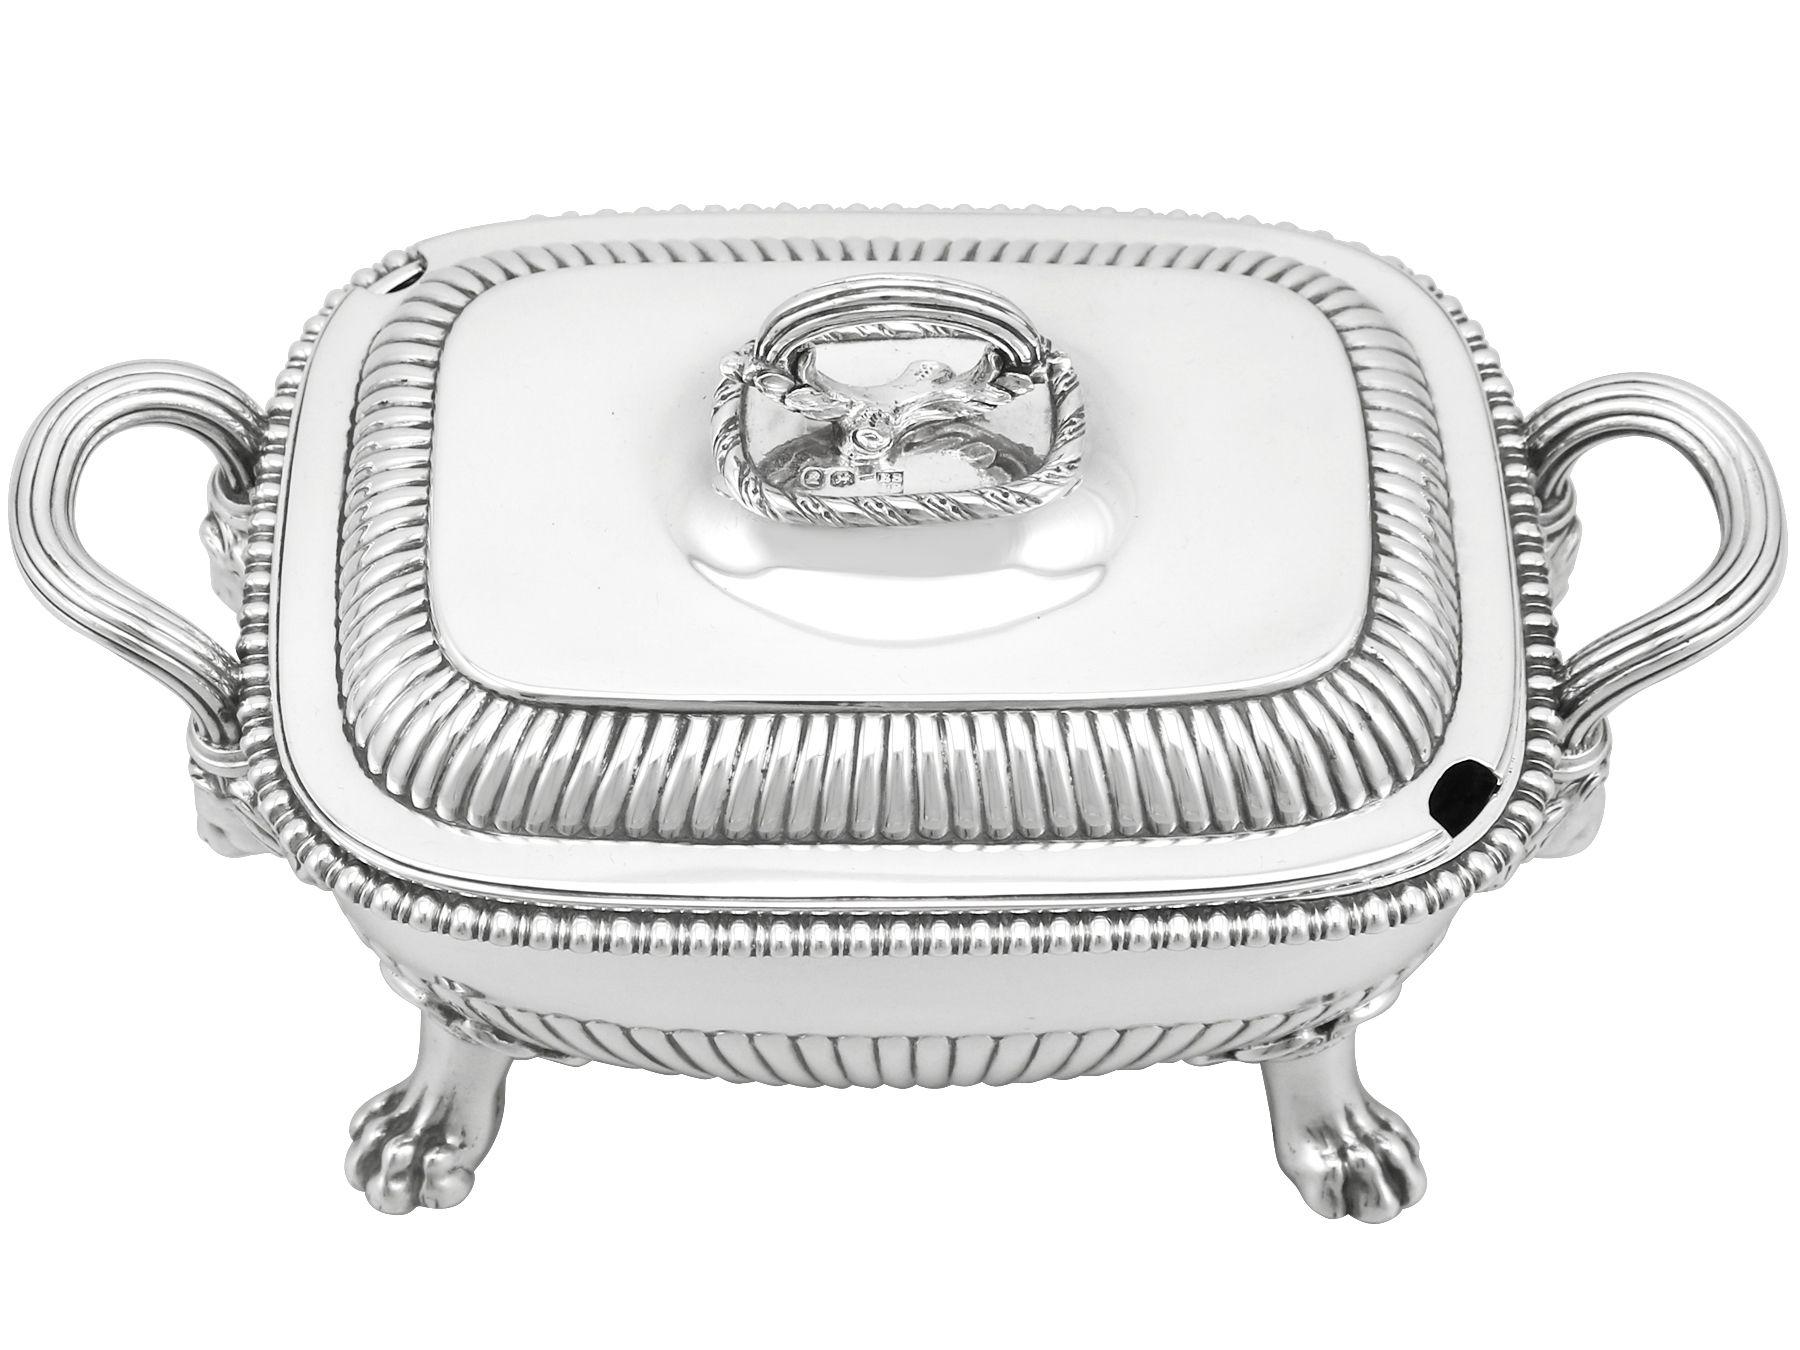 Antique George III Sterling Silver Tureens 1810 In Excellent Condition For Sale In Jesmond, Newcastle Upon Tyne